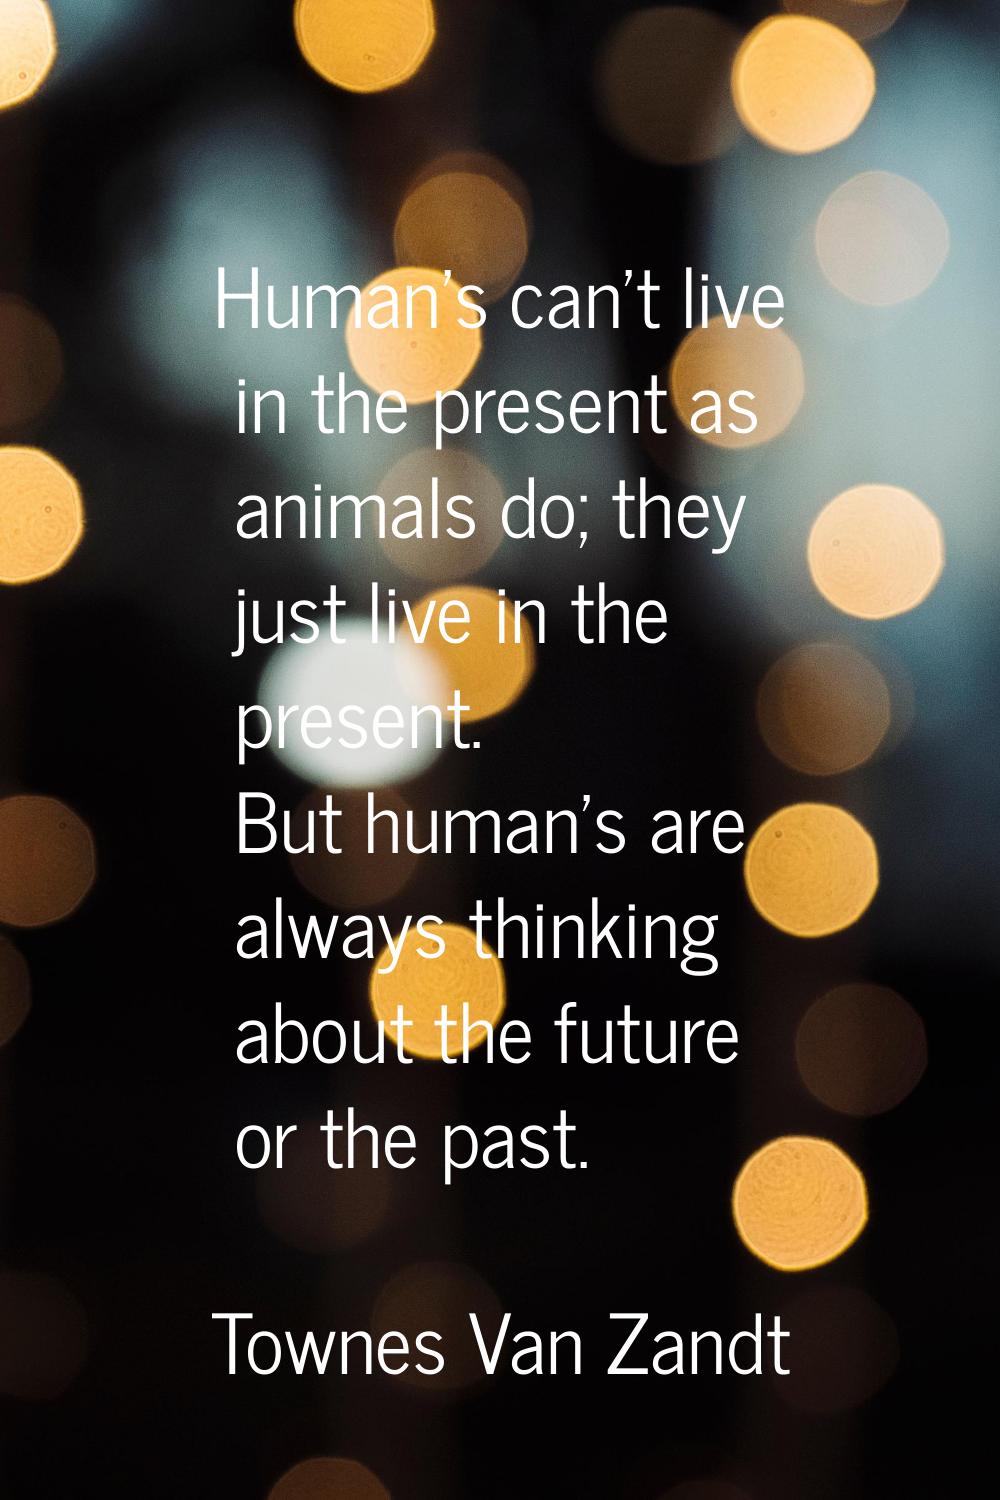 Human's can't live in the present as animals do; they just live in the present. But human's are alw